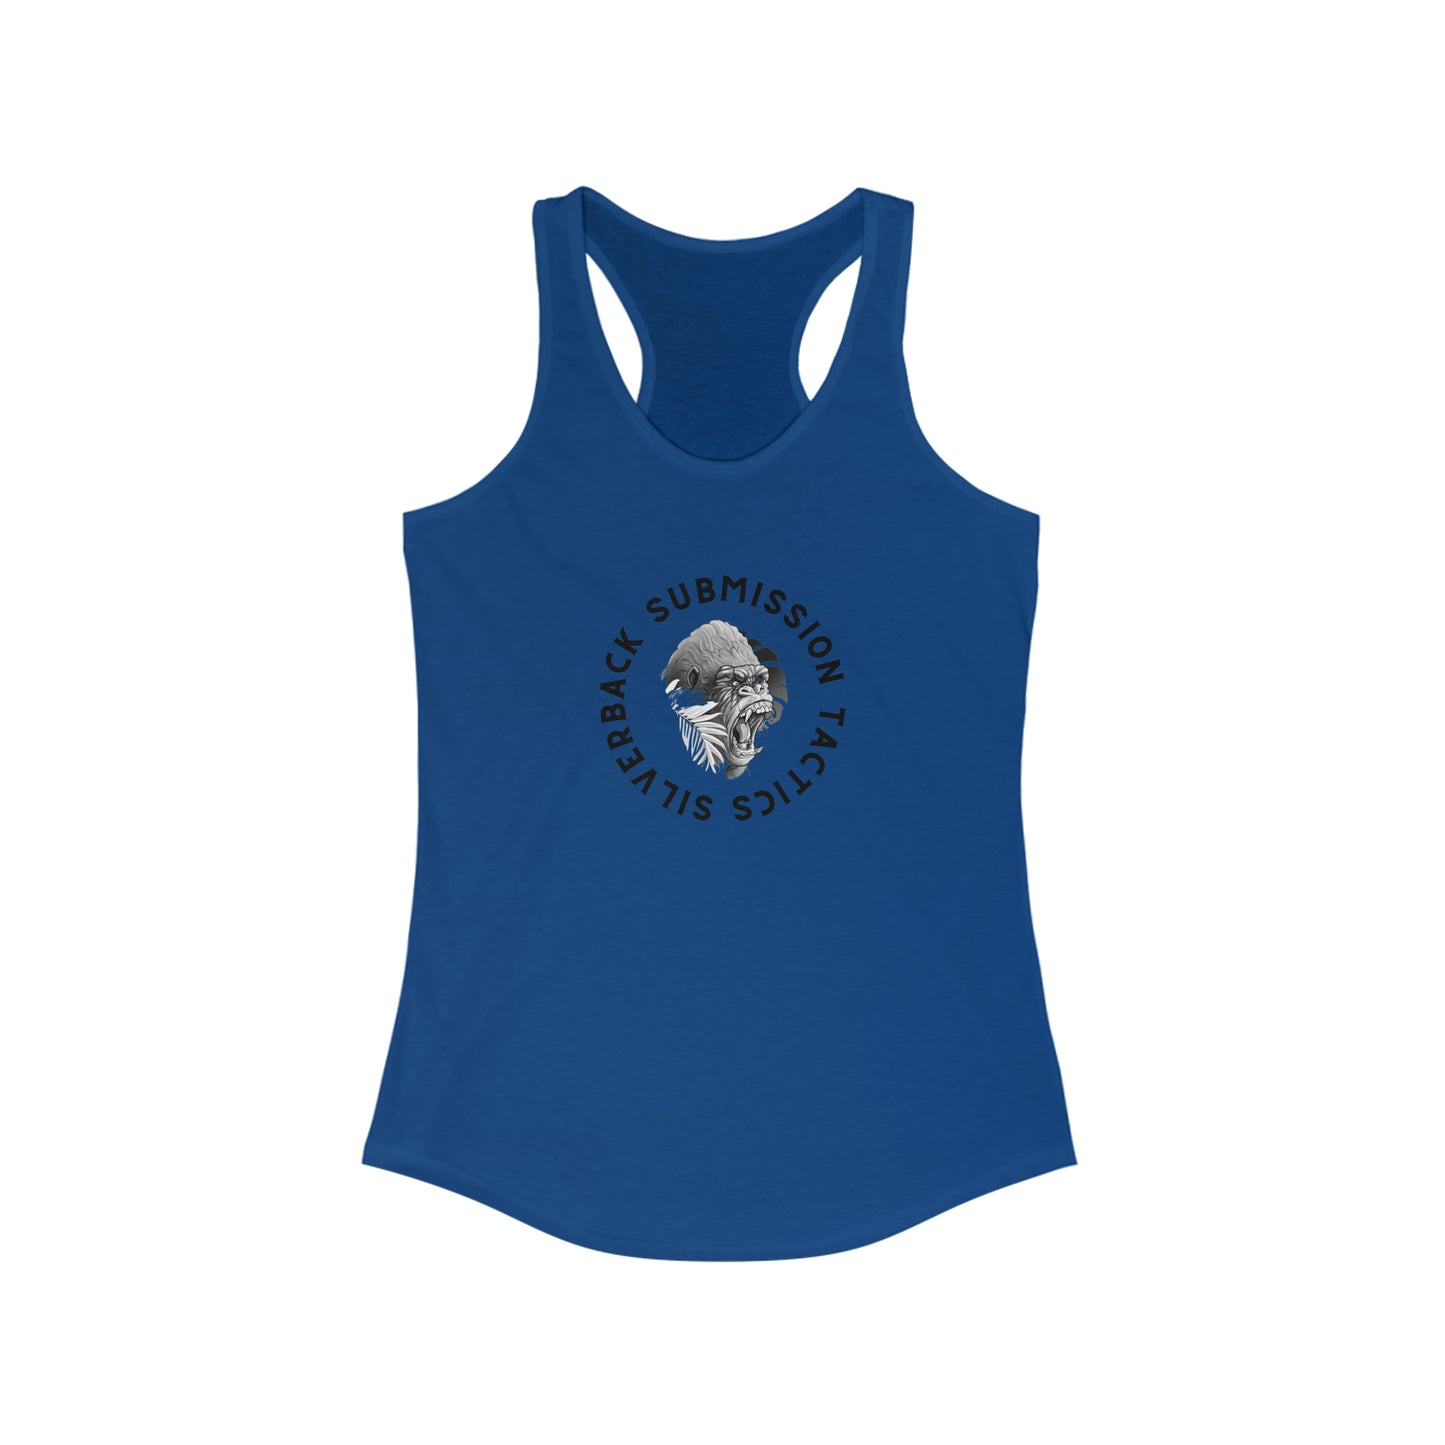 Women's Silverback Submission Tactics Ideal Racerback Tank